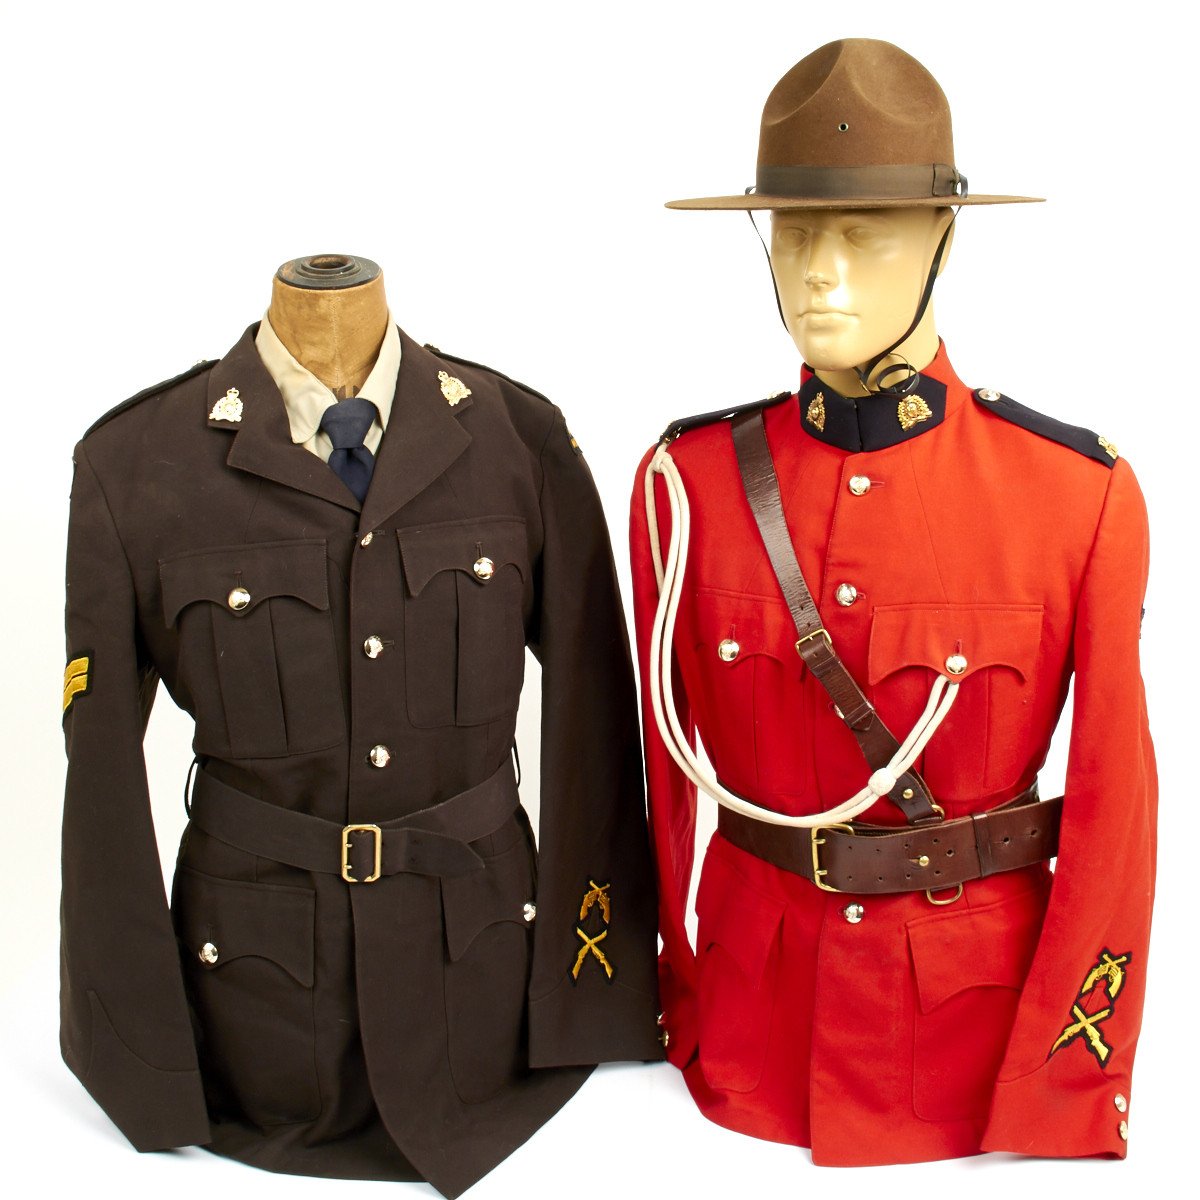 Sold At Auction: RCMP ROYAL CANADIAN MOUNTED POLICE UNIFORM, 41% OFF